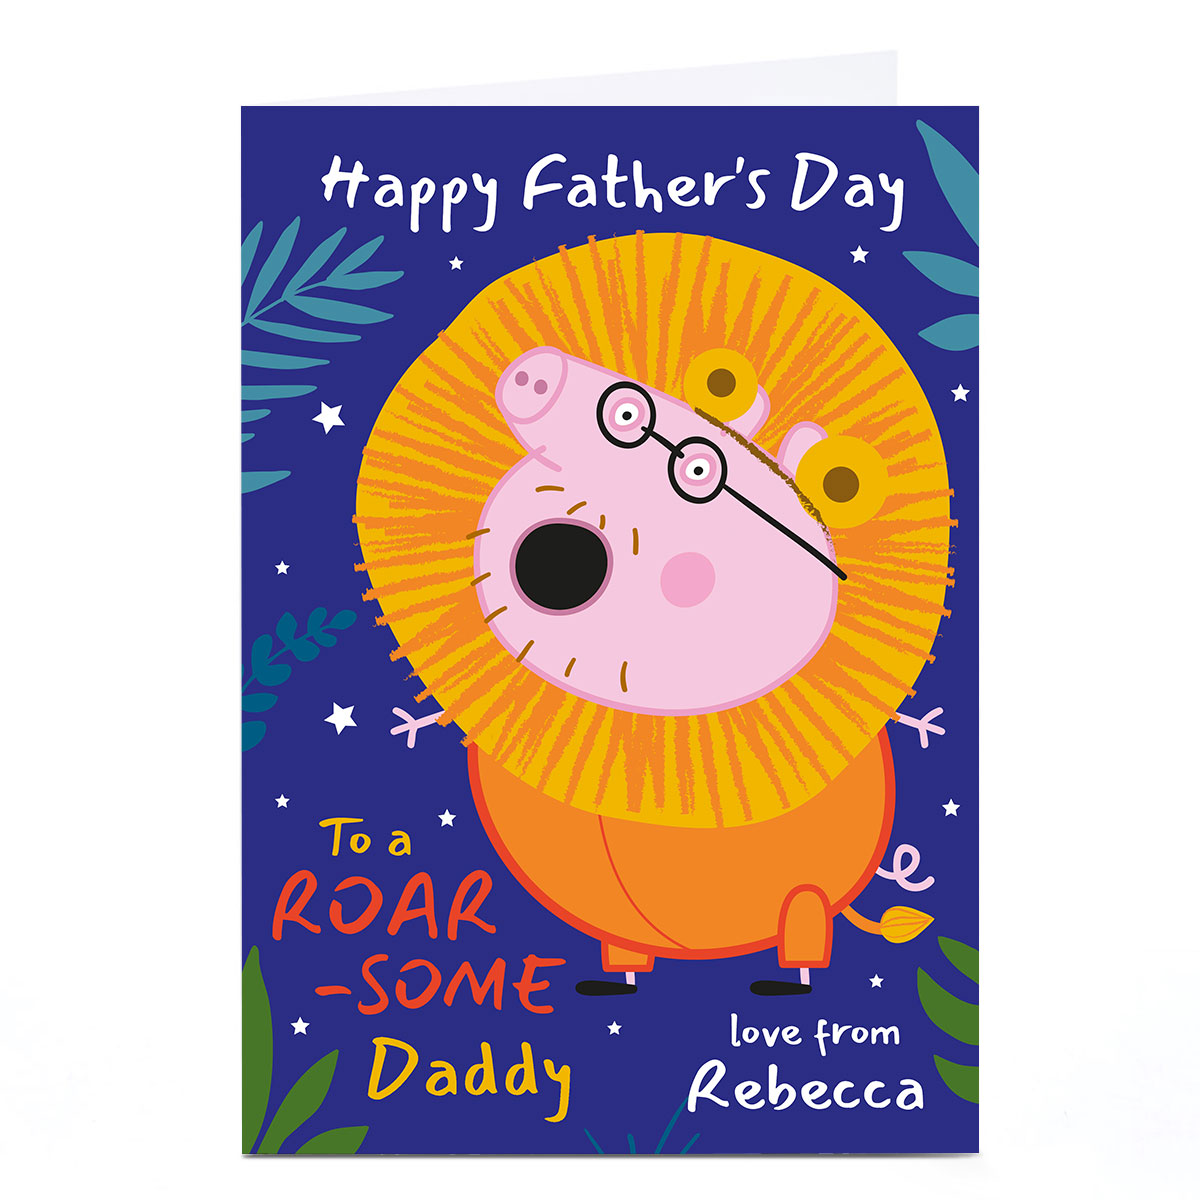 Personalised Peppa Pig Father's Day Card - Roarsome Daddy Pig